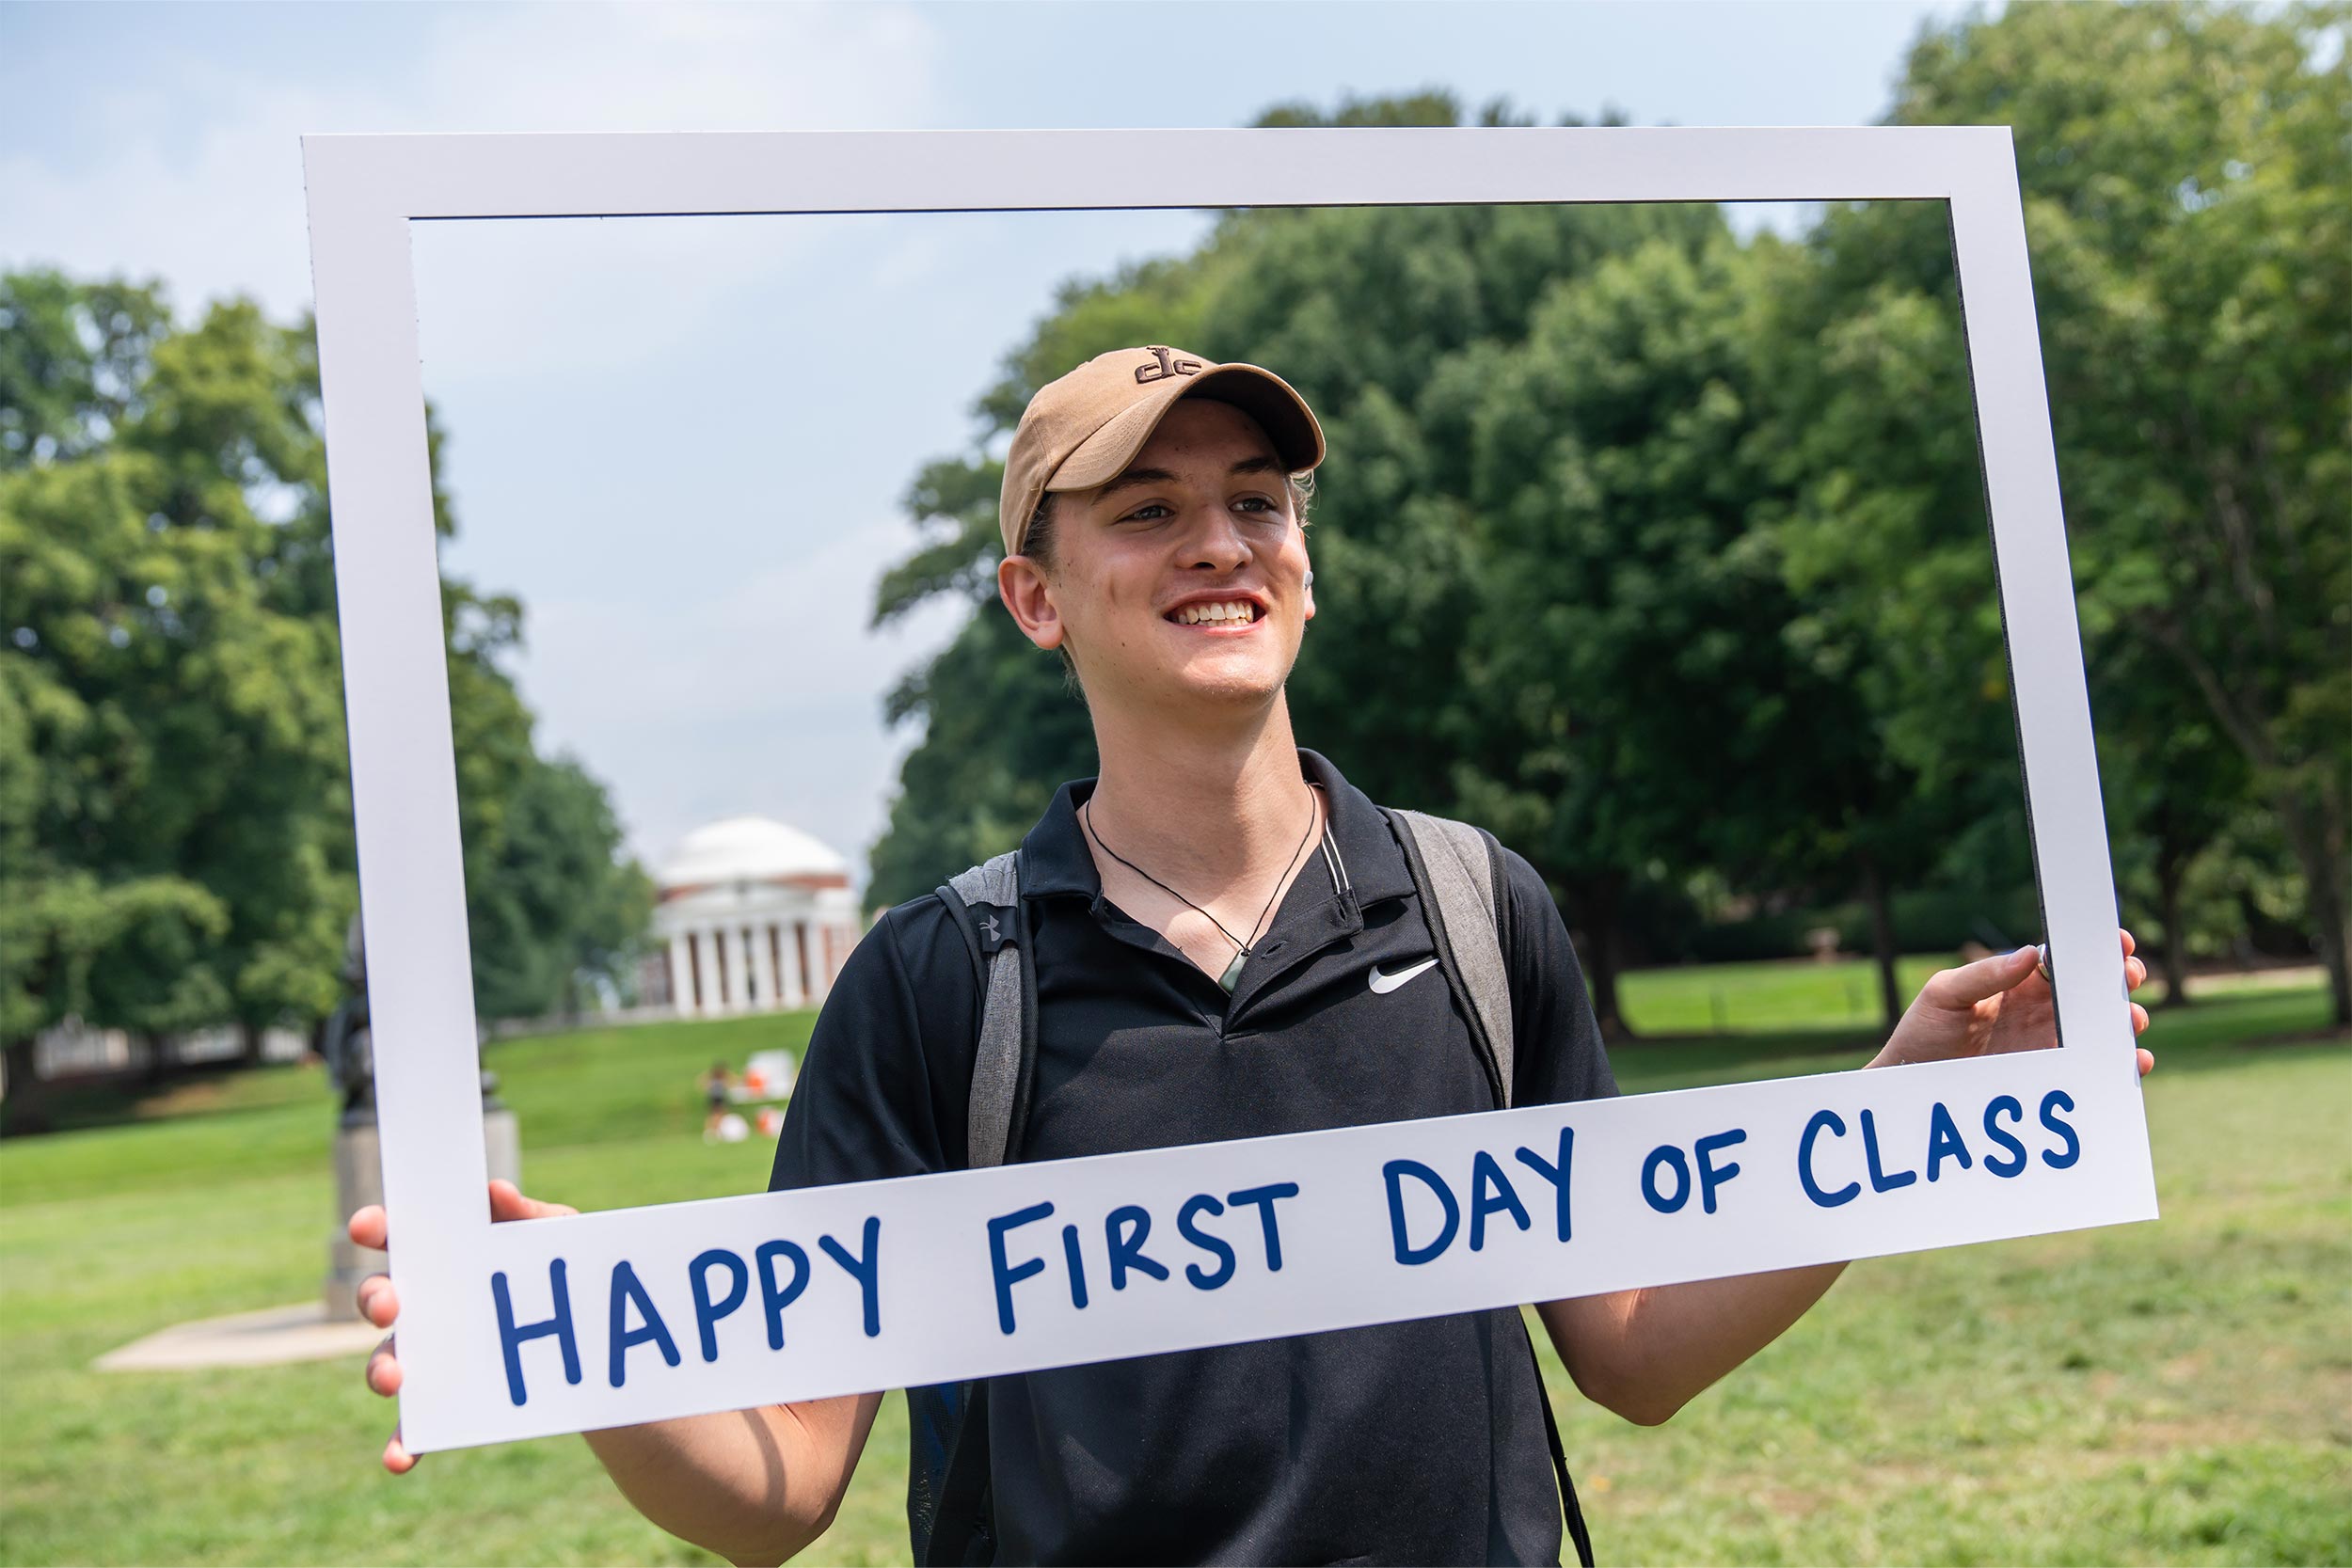 student poses happily on first day of school